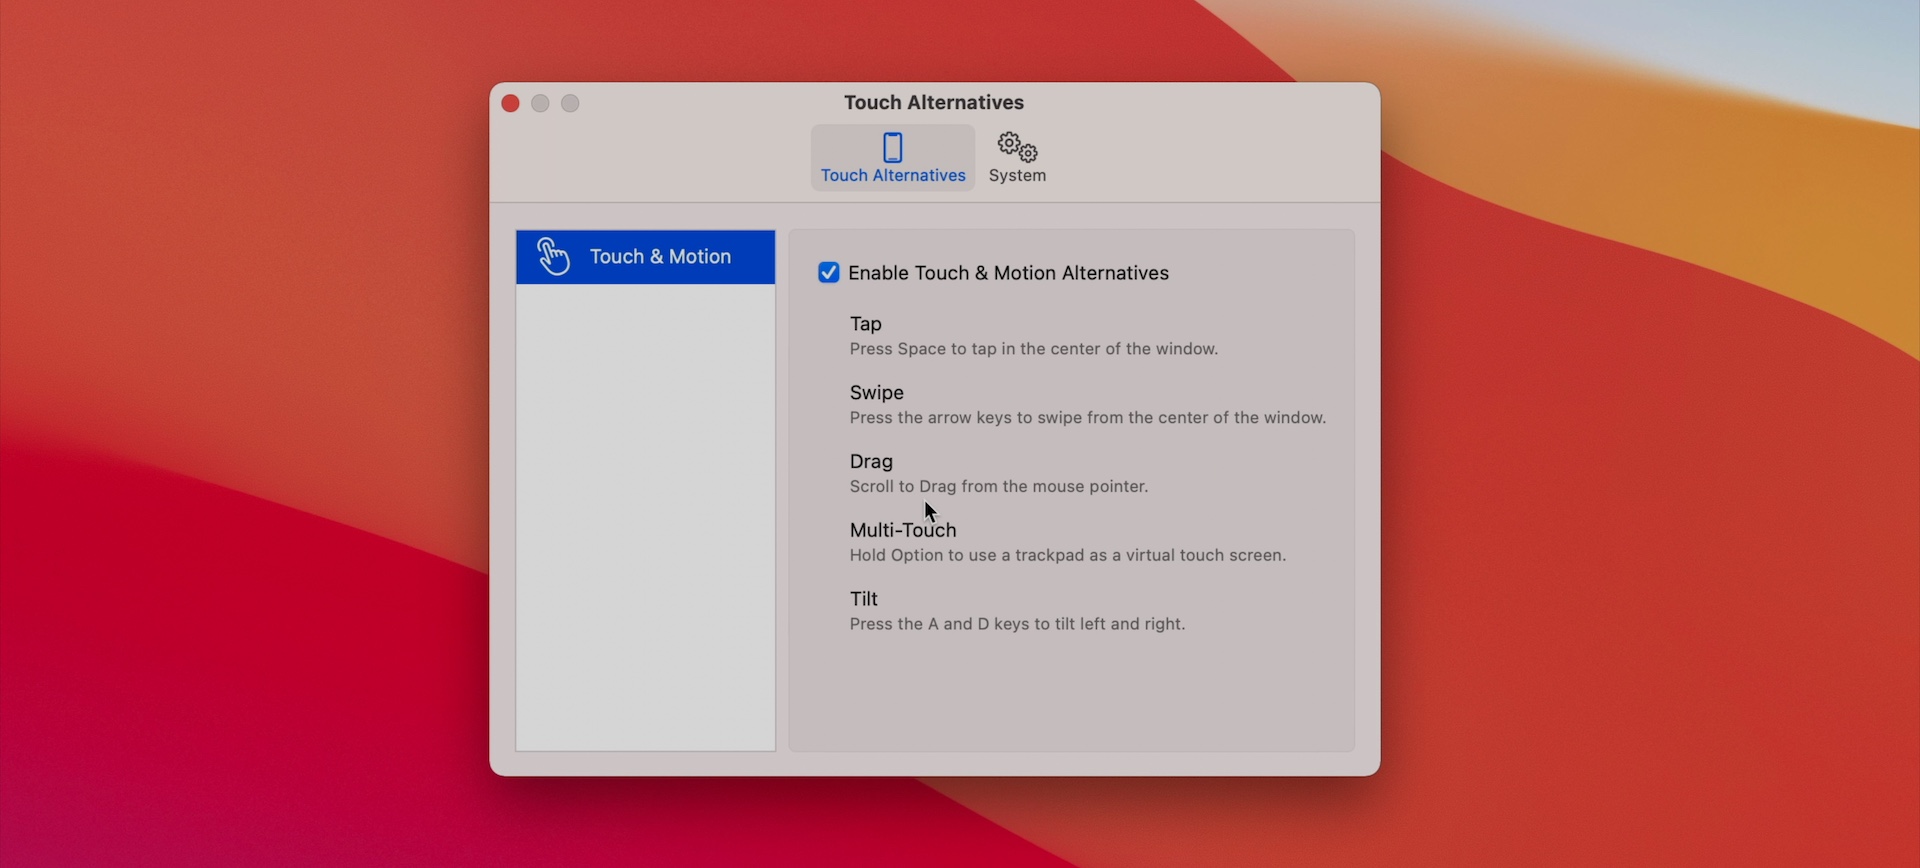 download the last version for mac iThoughts 6.5